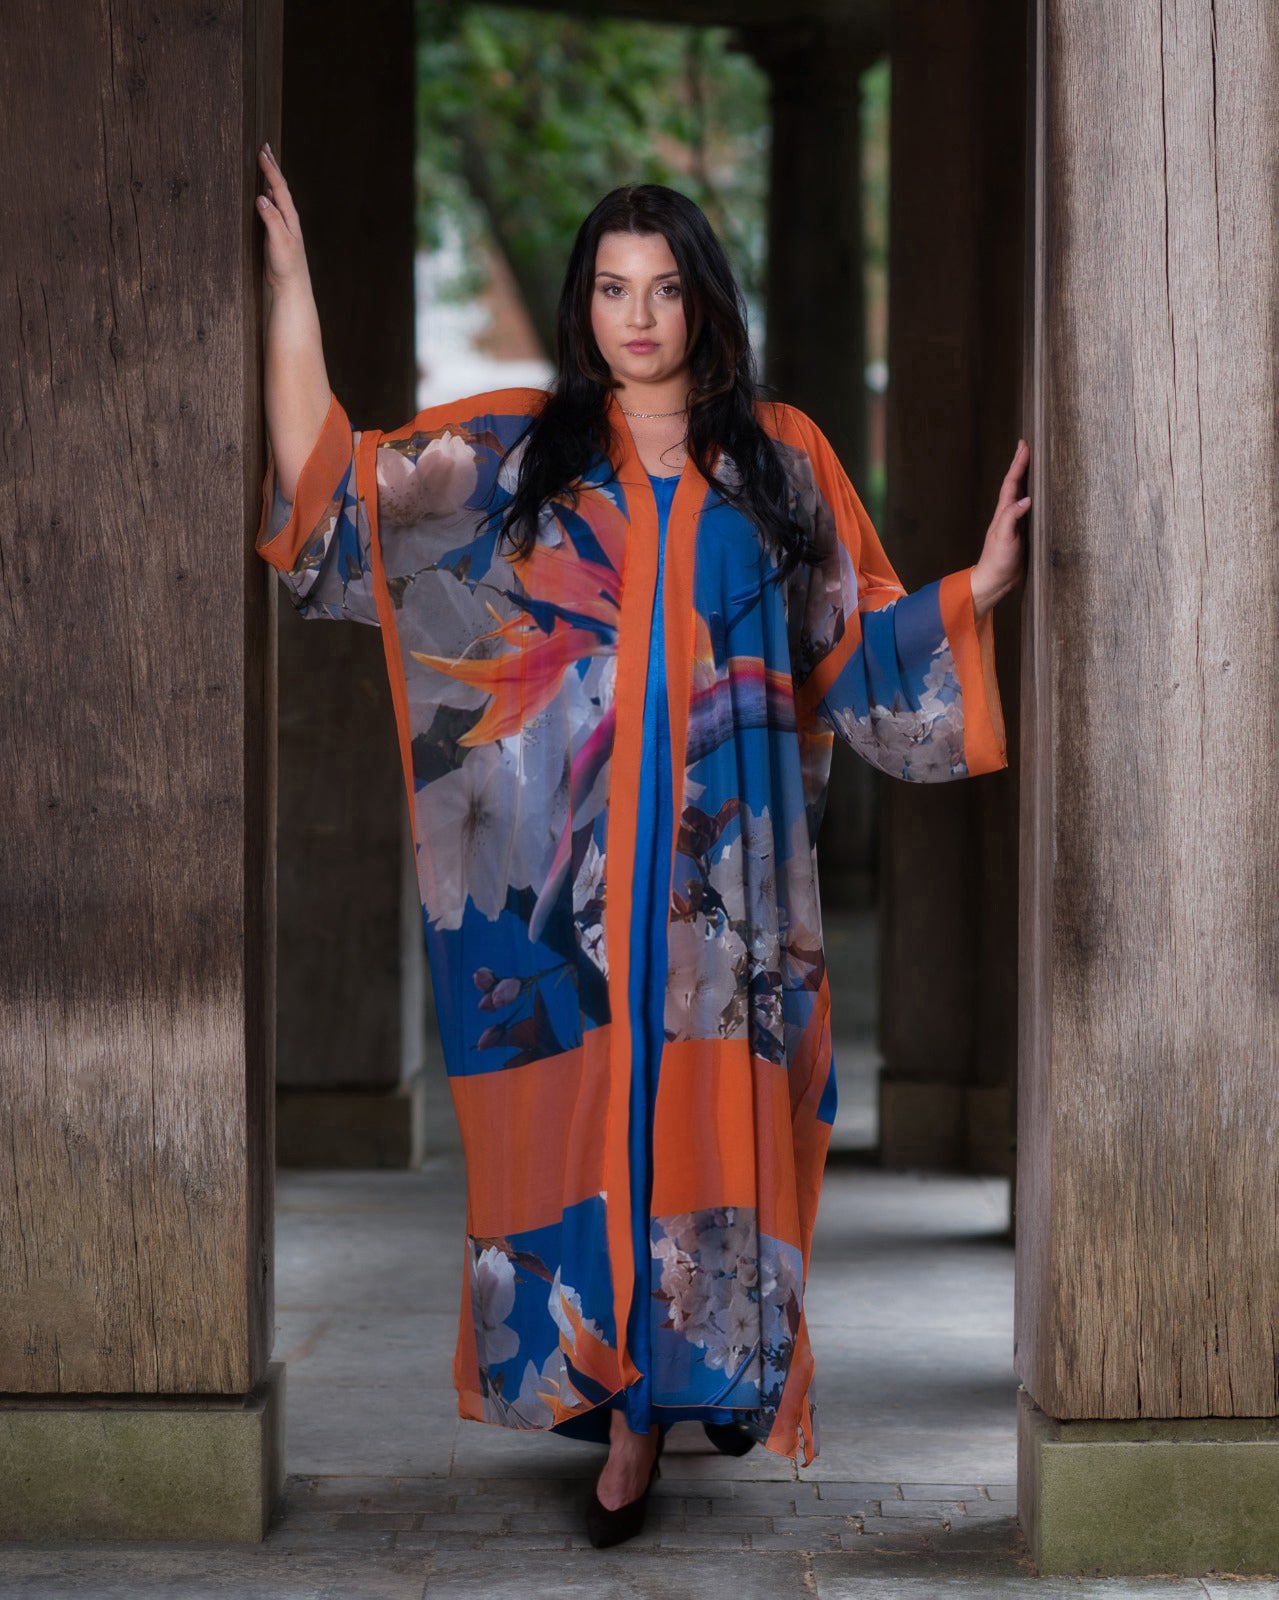 Women's White and Blue Plus Size Georgette Cherry Blossom Kimono styled with a blue dress and black heels.